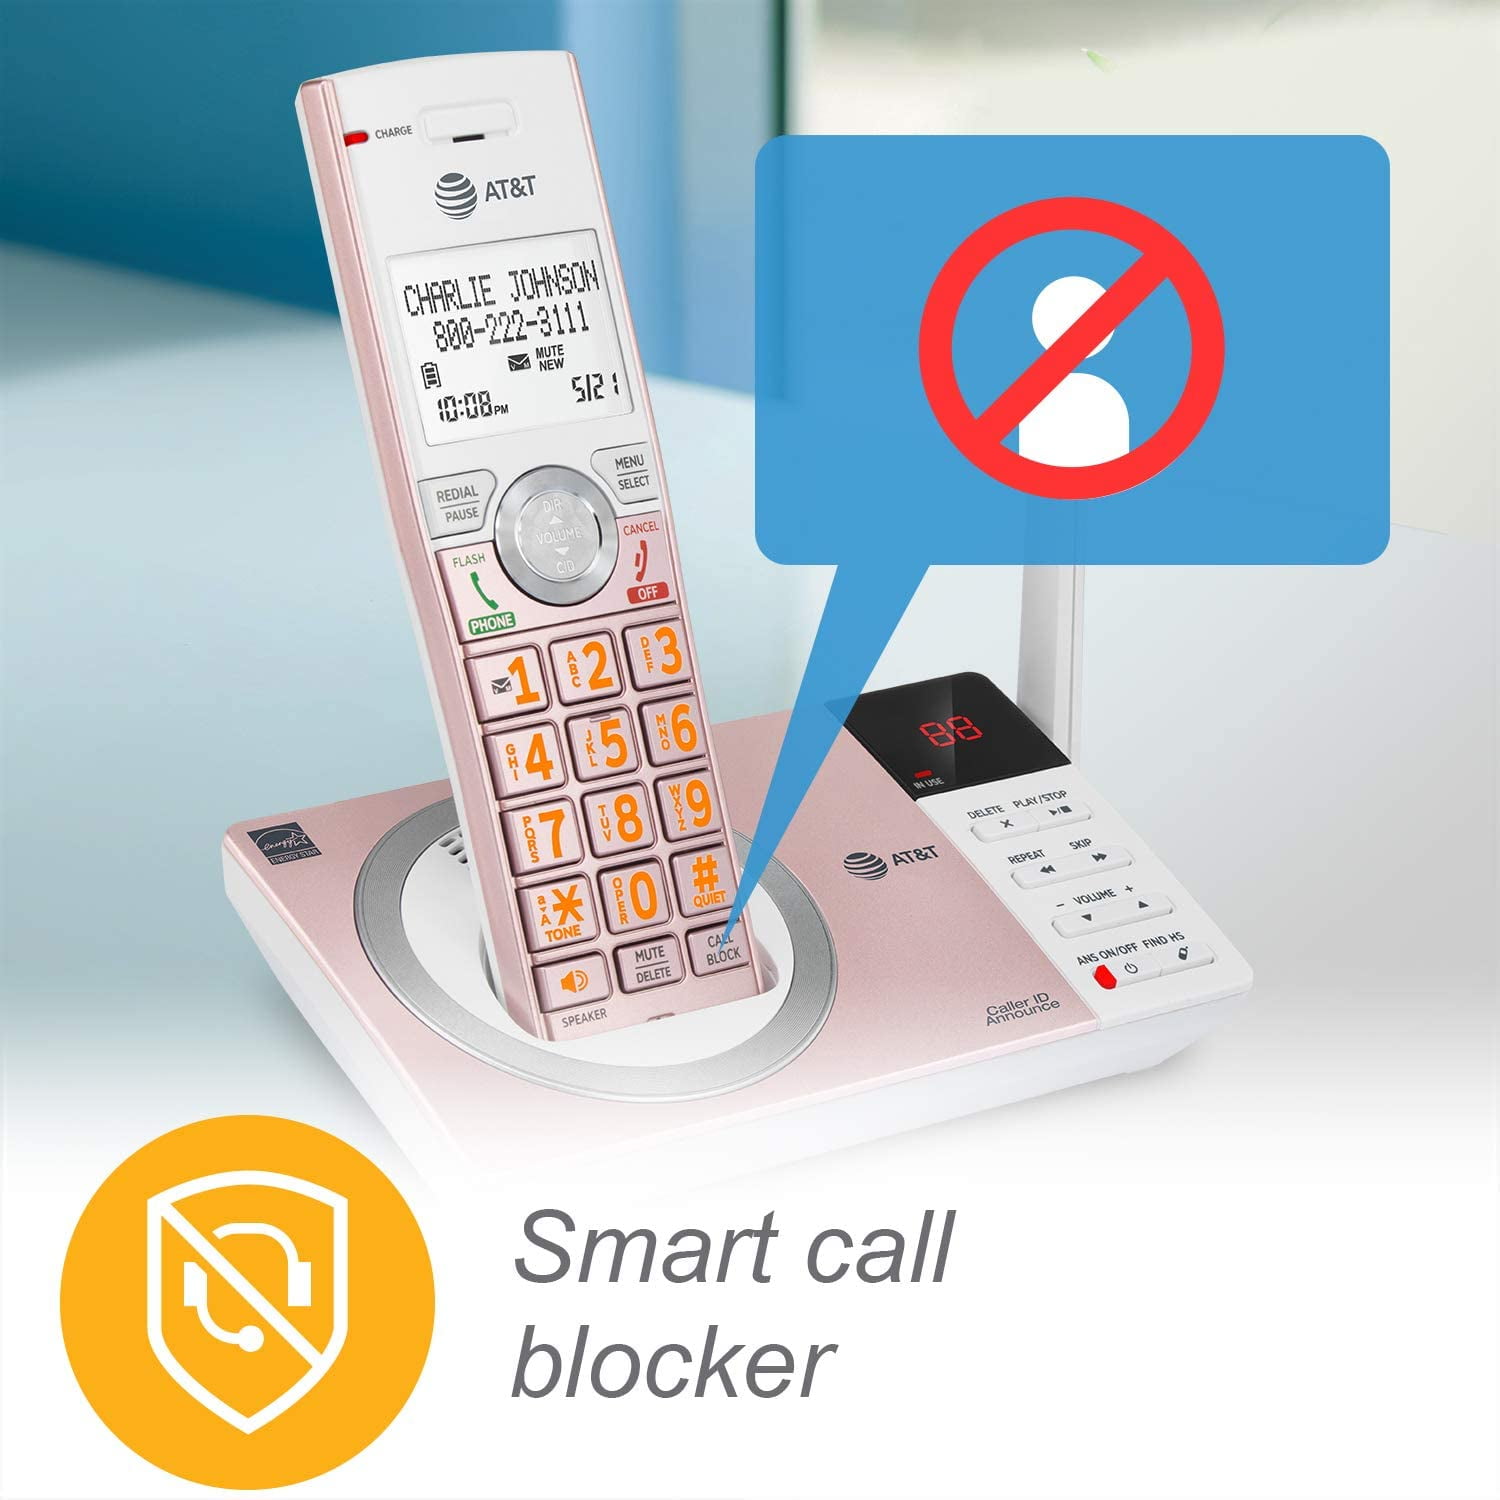 AT&T CL82257 DECT 6.0 Expandable Cordless Phone with Answering System & Smart Call Blocker and 2 Handset Rose Gold 